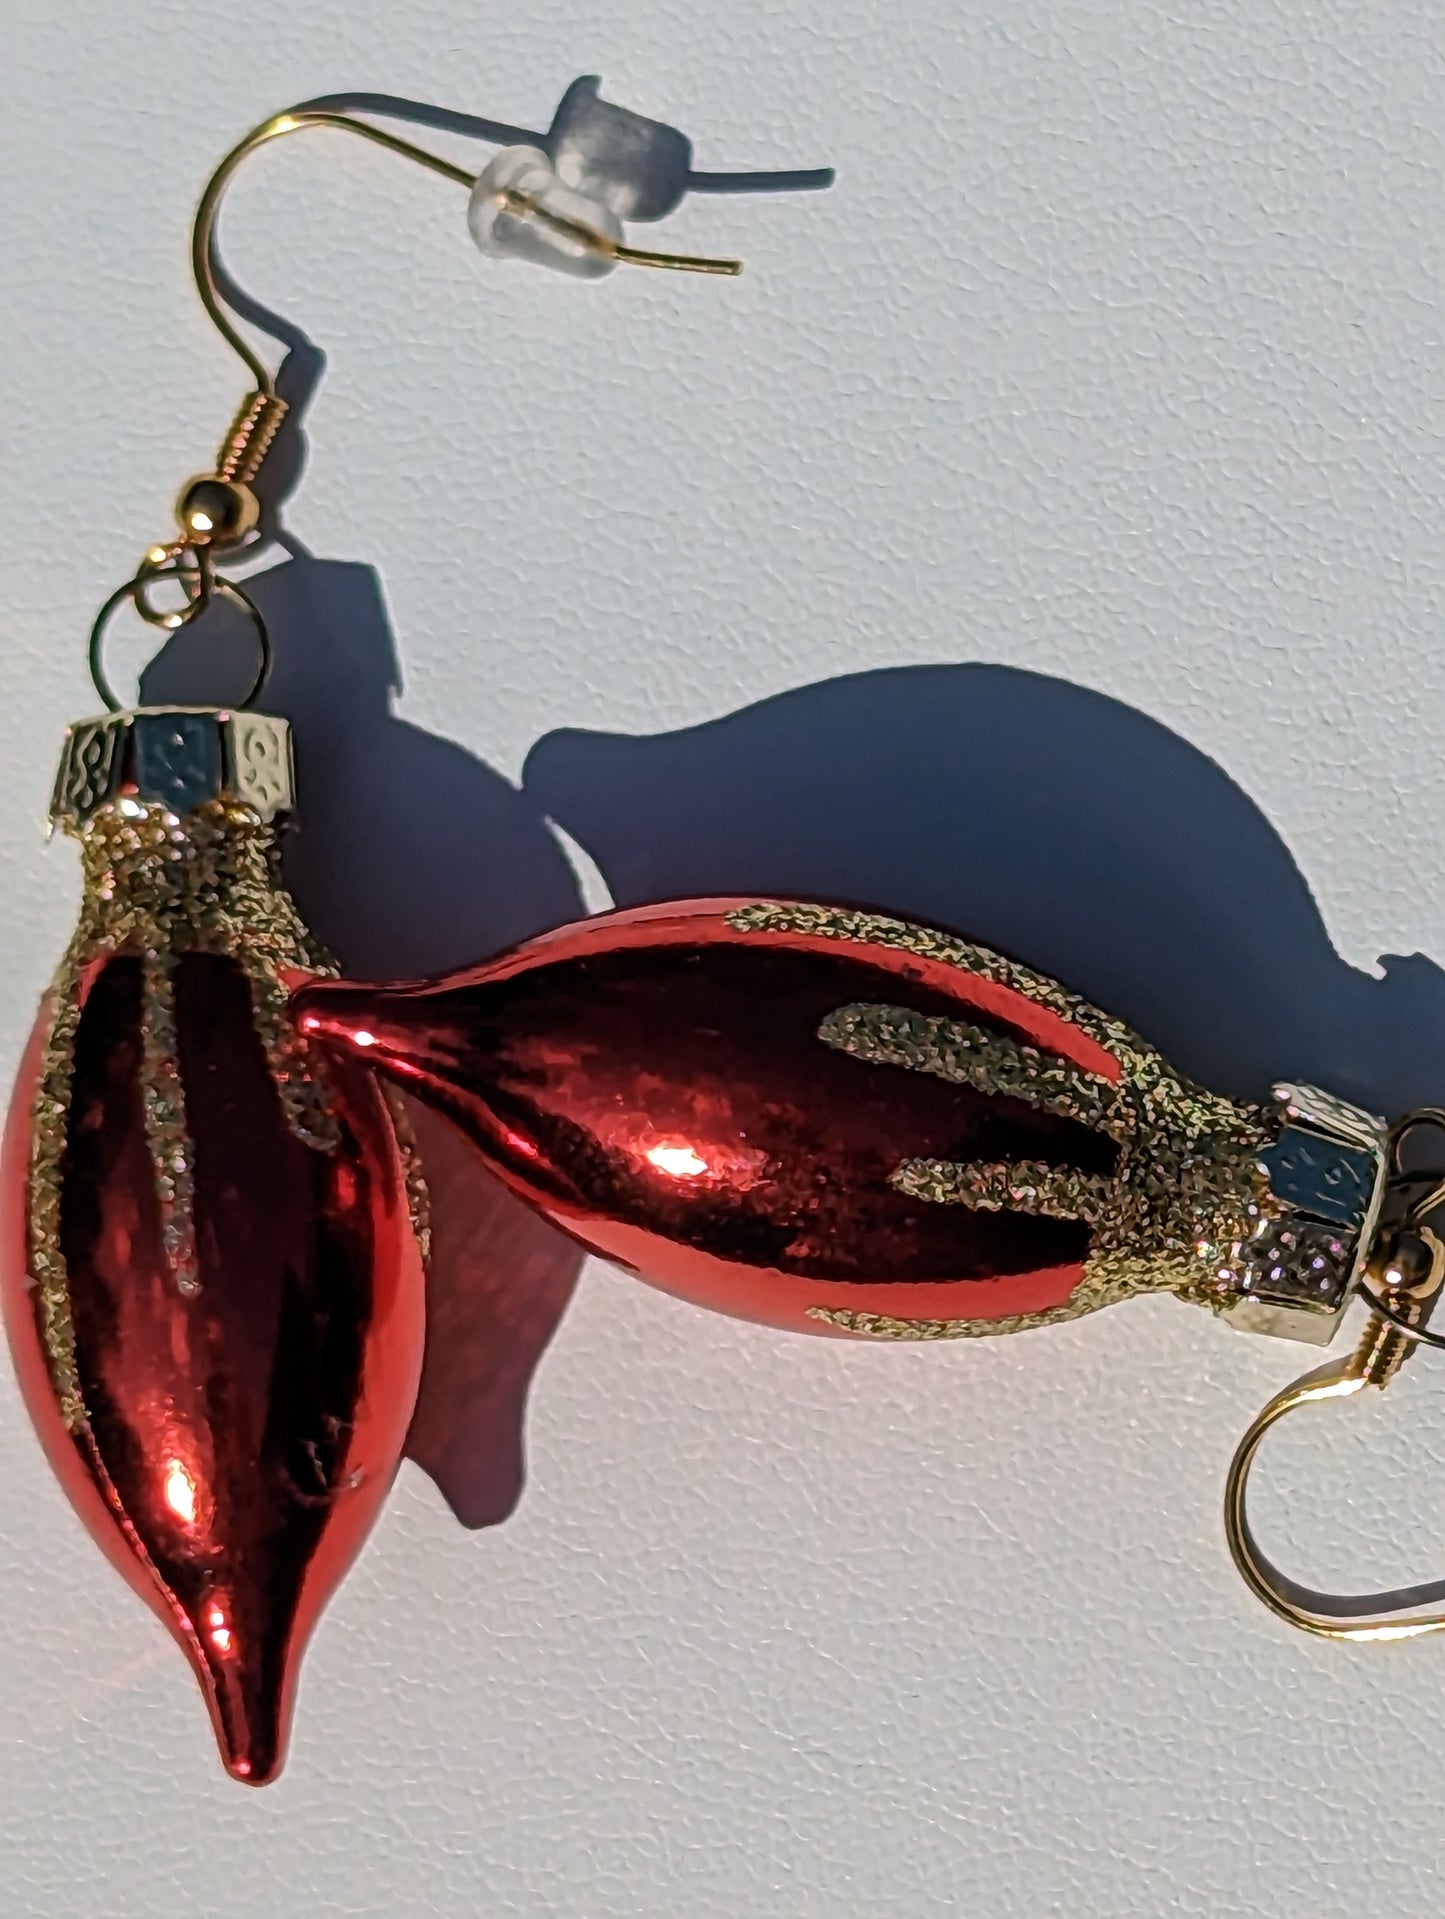 Vintage Candle-drop Red Christmas Ornament Earrings